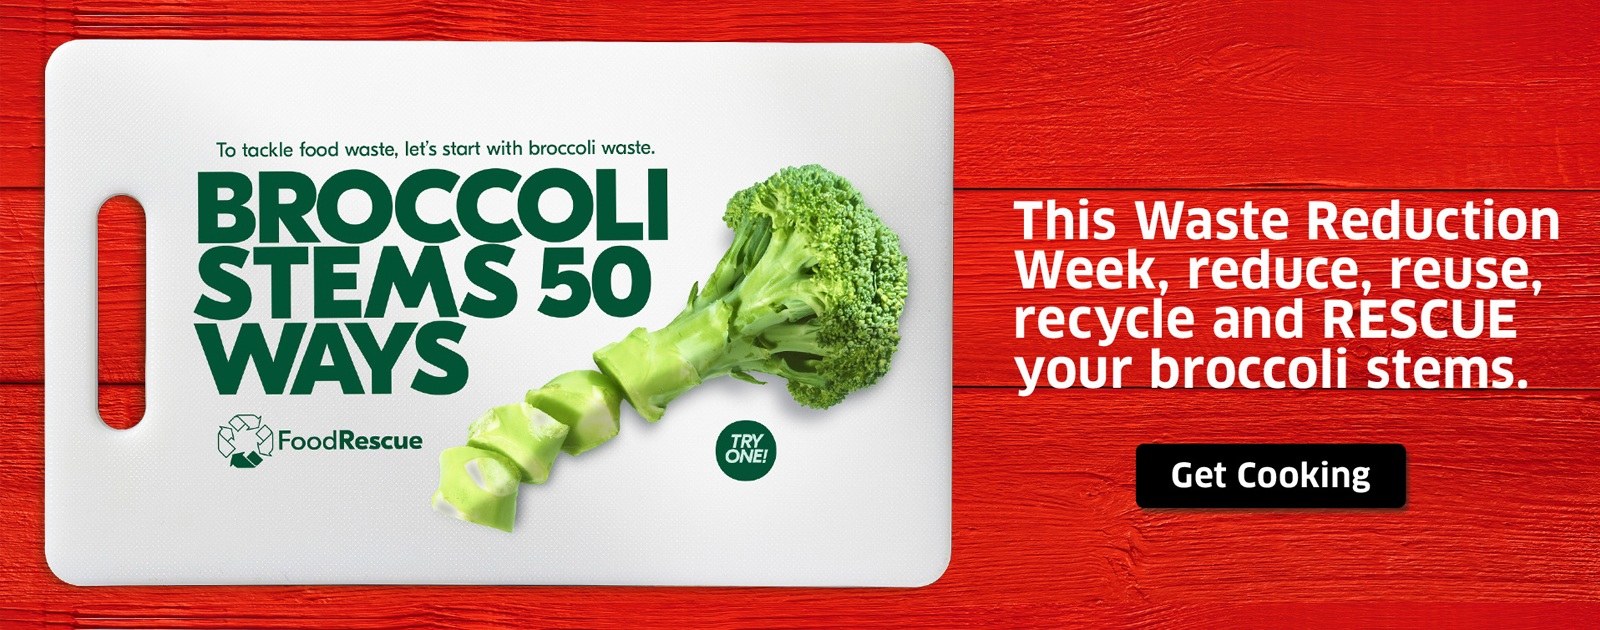 This image consists of a broccoli stem with the text "To tackle food waste, let's start with broccoli waste. Broccoli Stems 50 ways.